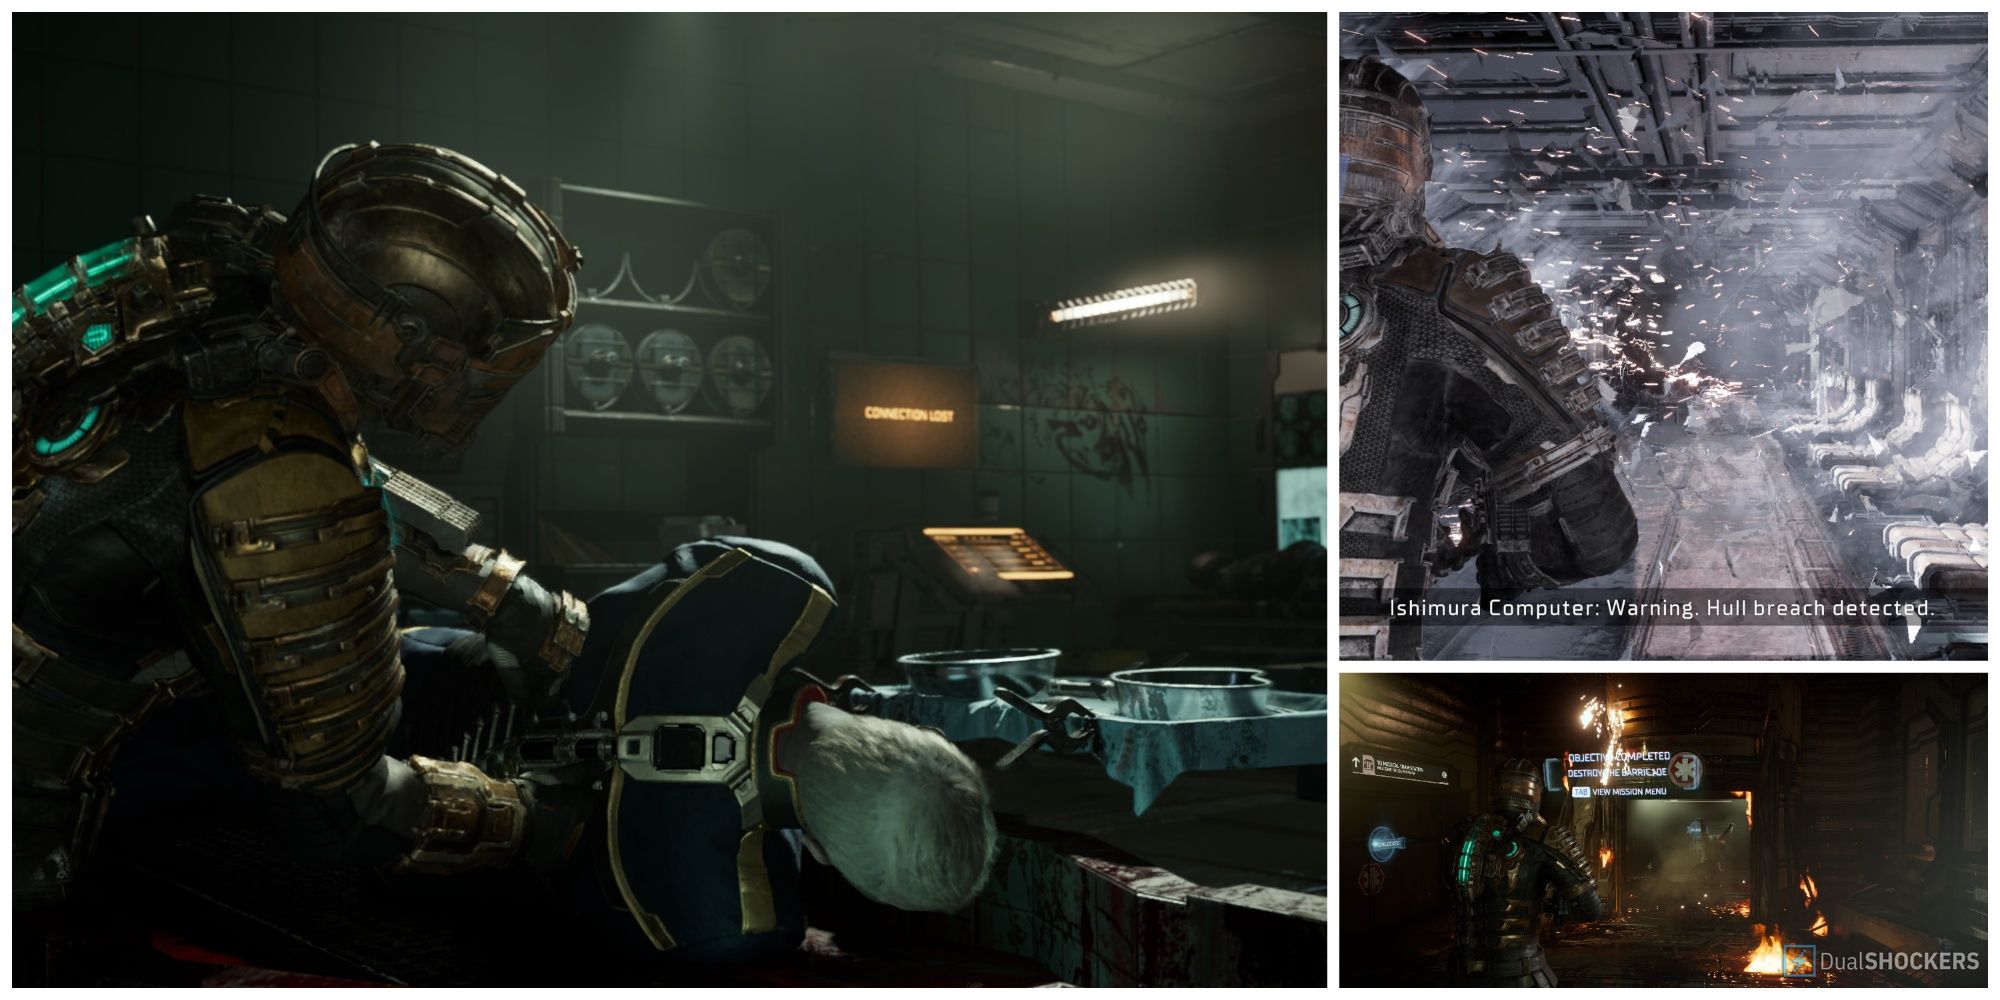 Dead Space Remake Isaac examines Captain's body, Isaac enters zero gravity area, and Isaac passing through doorway